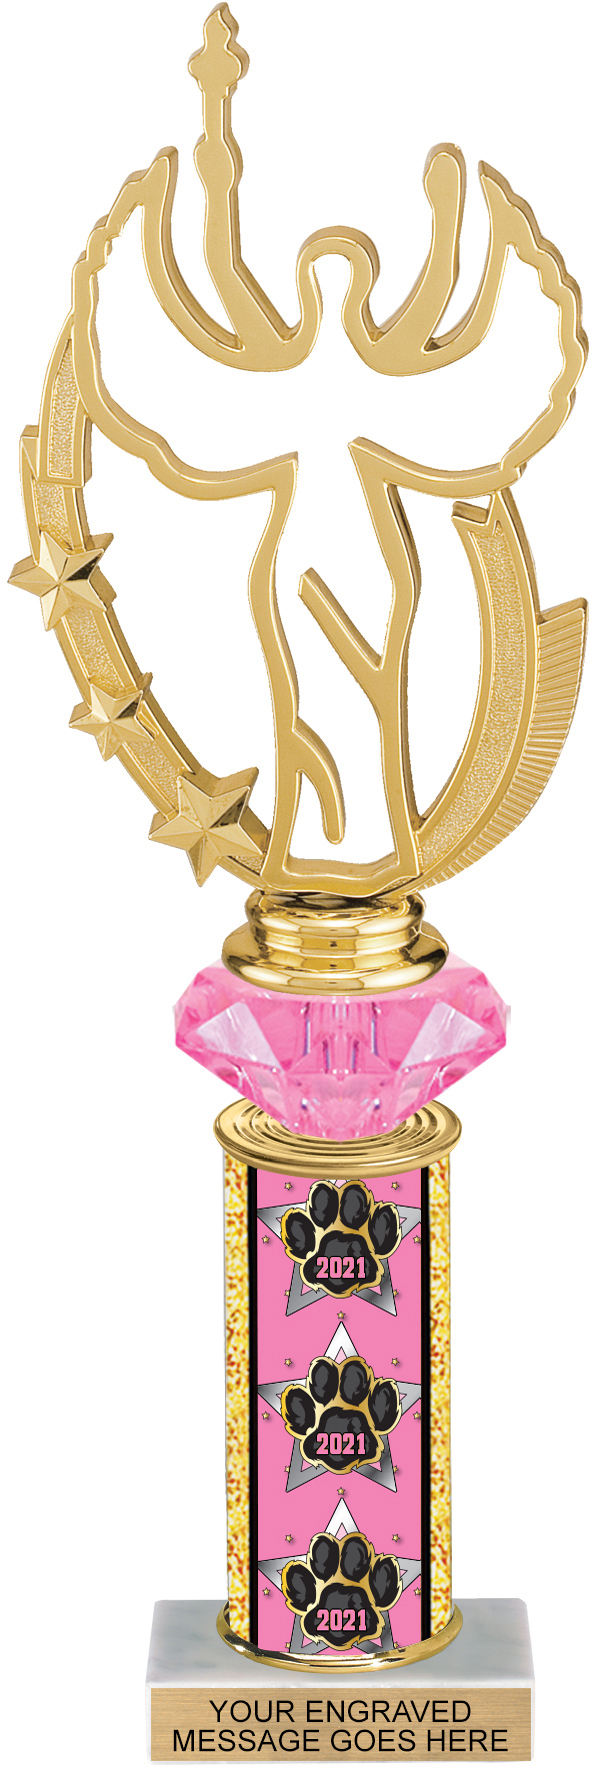 Diamond Riser Year Exclusive Paw Trophy - 11 inch